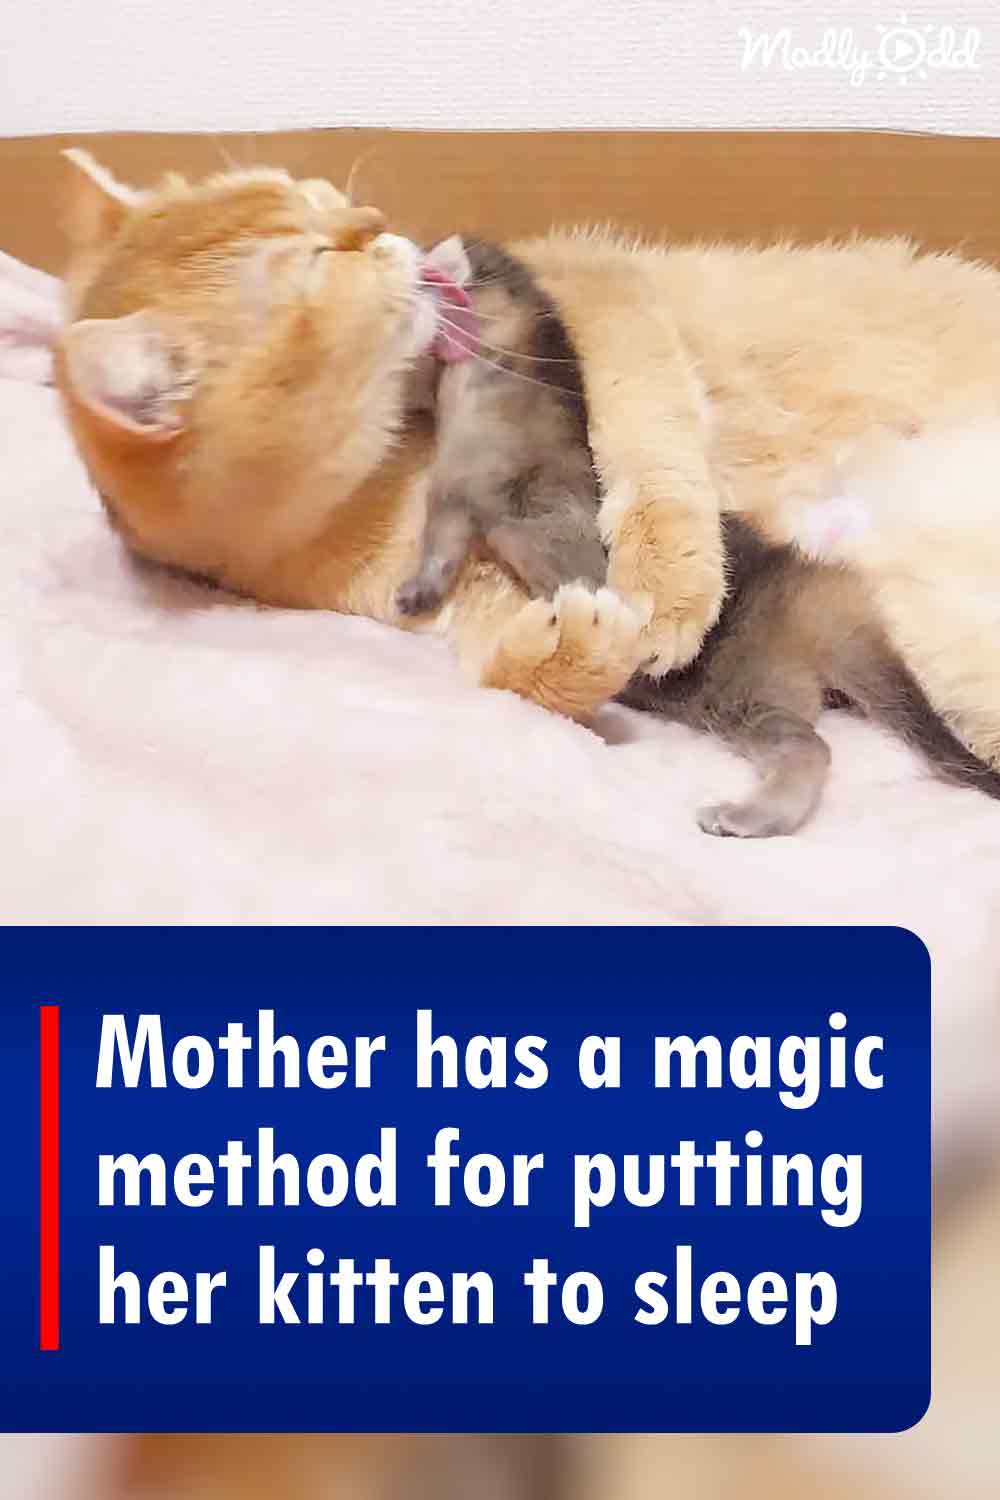 Mother has a magic method for putting her kitten to sleep